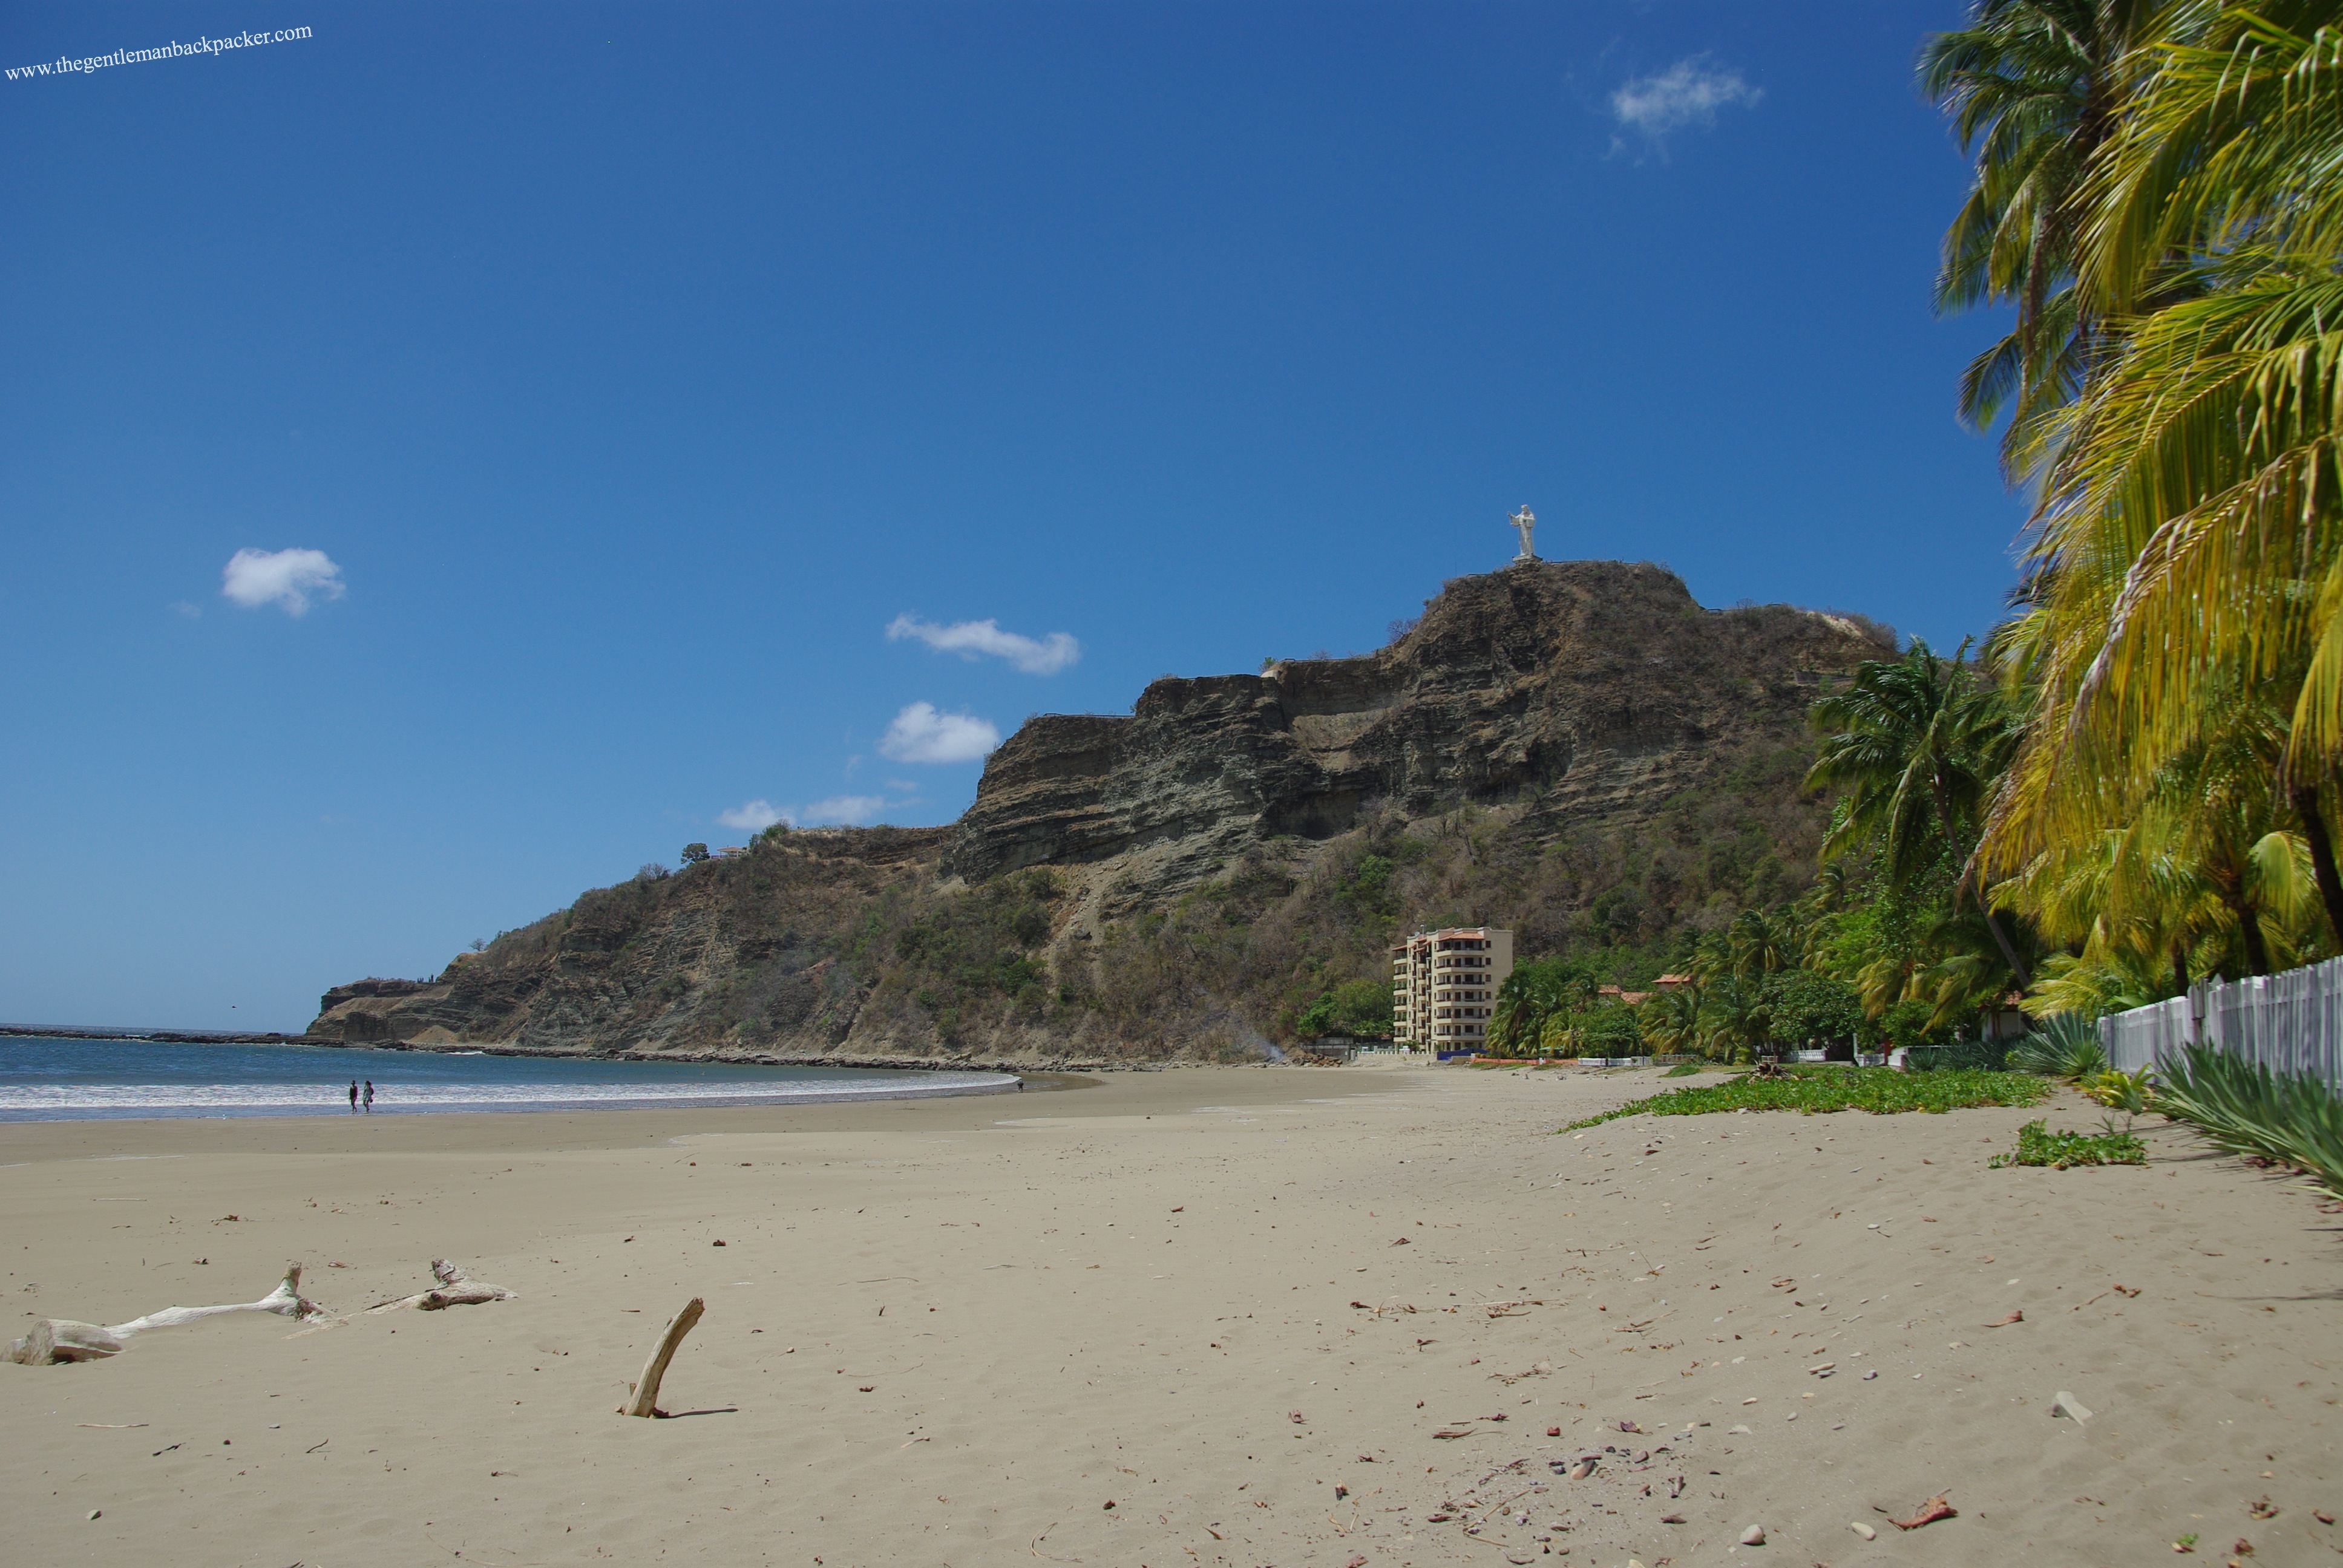 San Juan del Sur Beach and the Statue of Christ